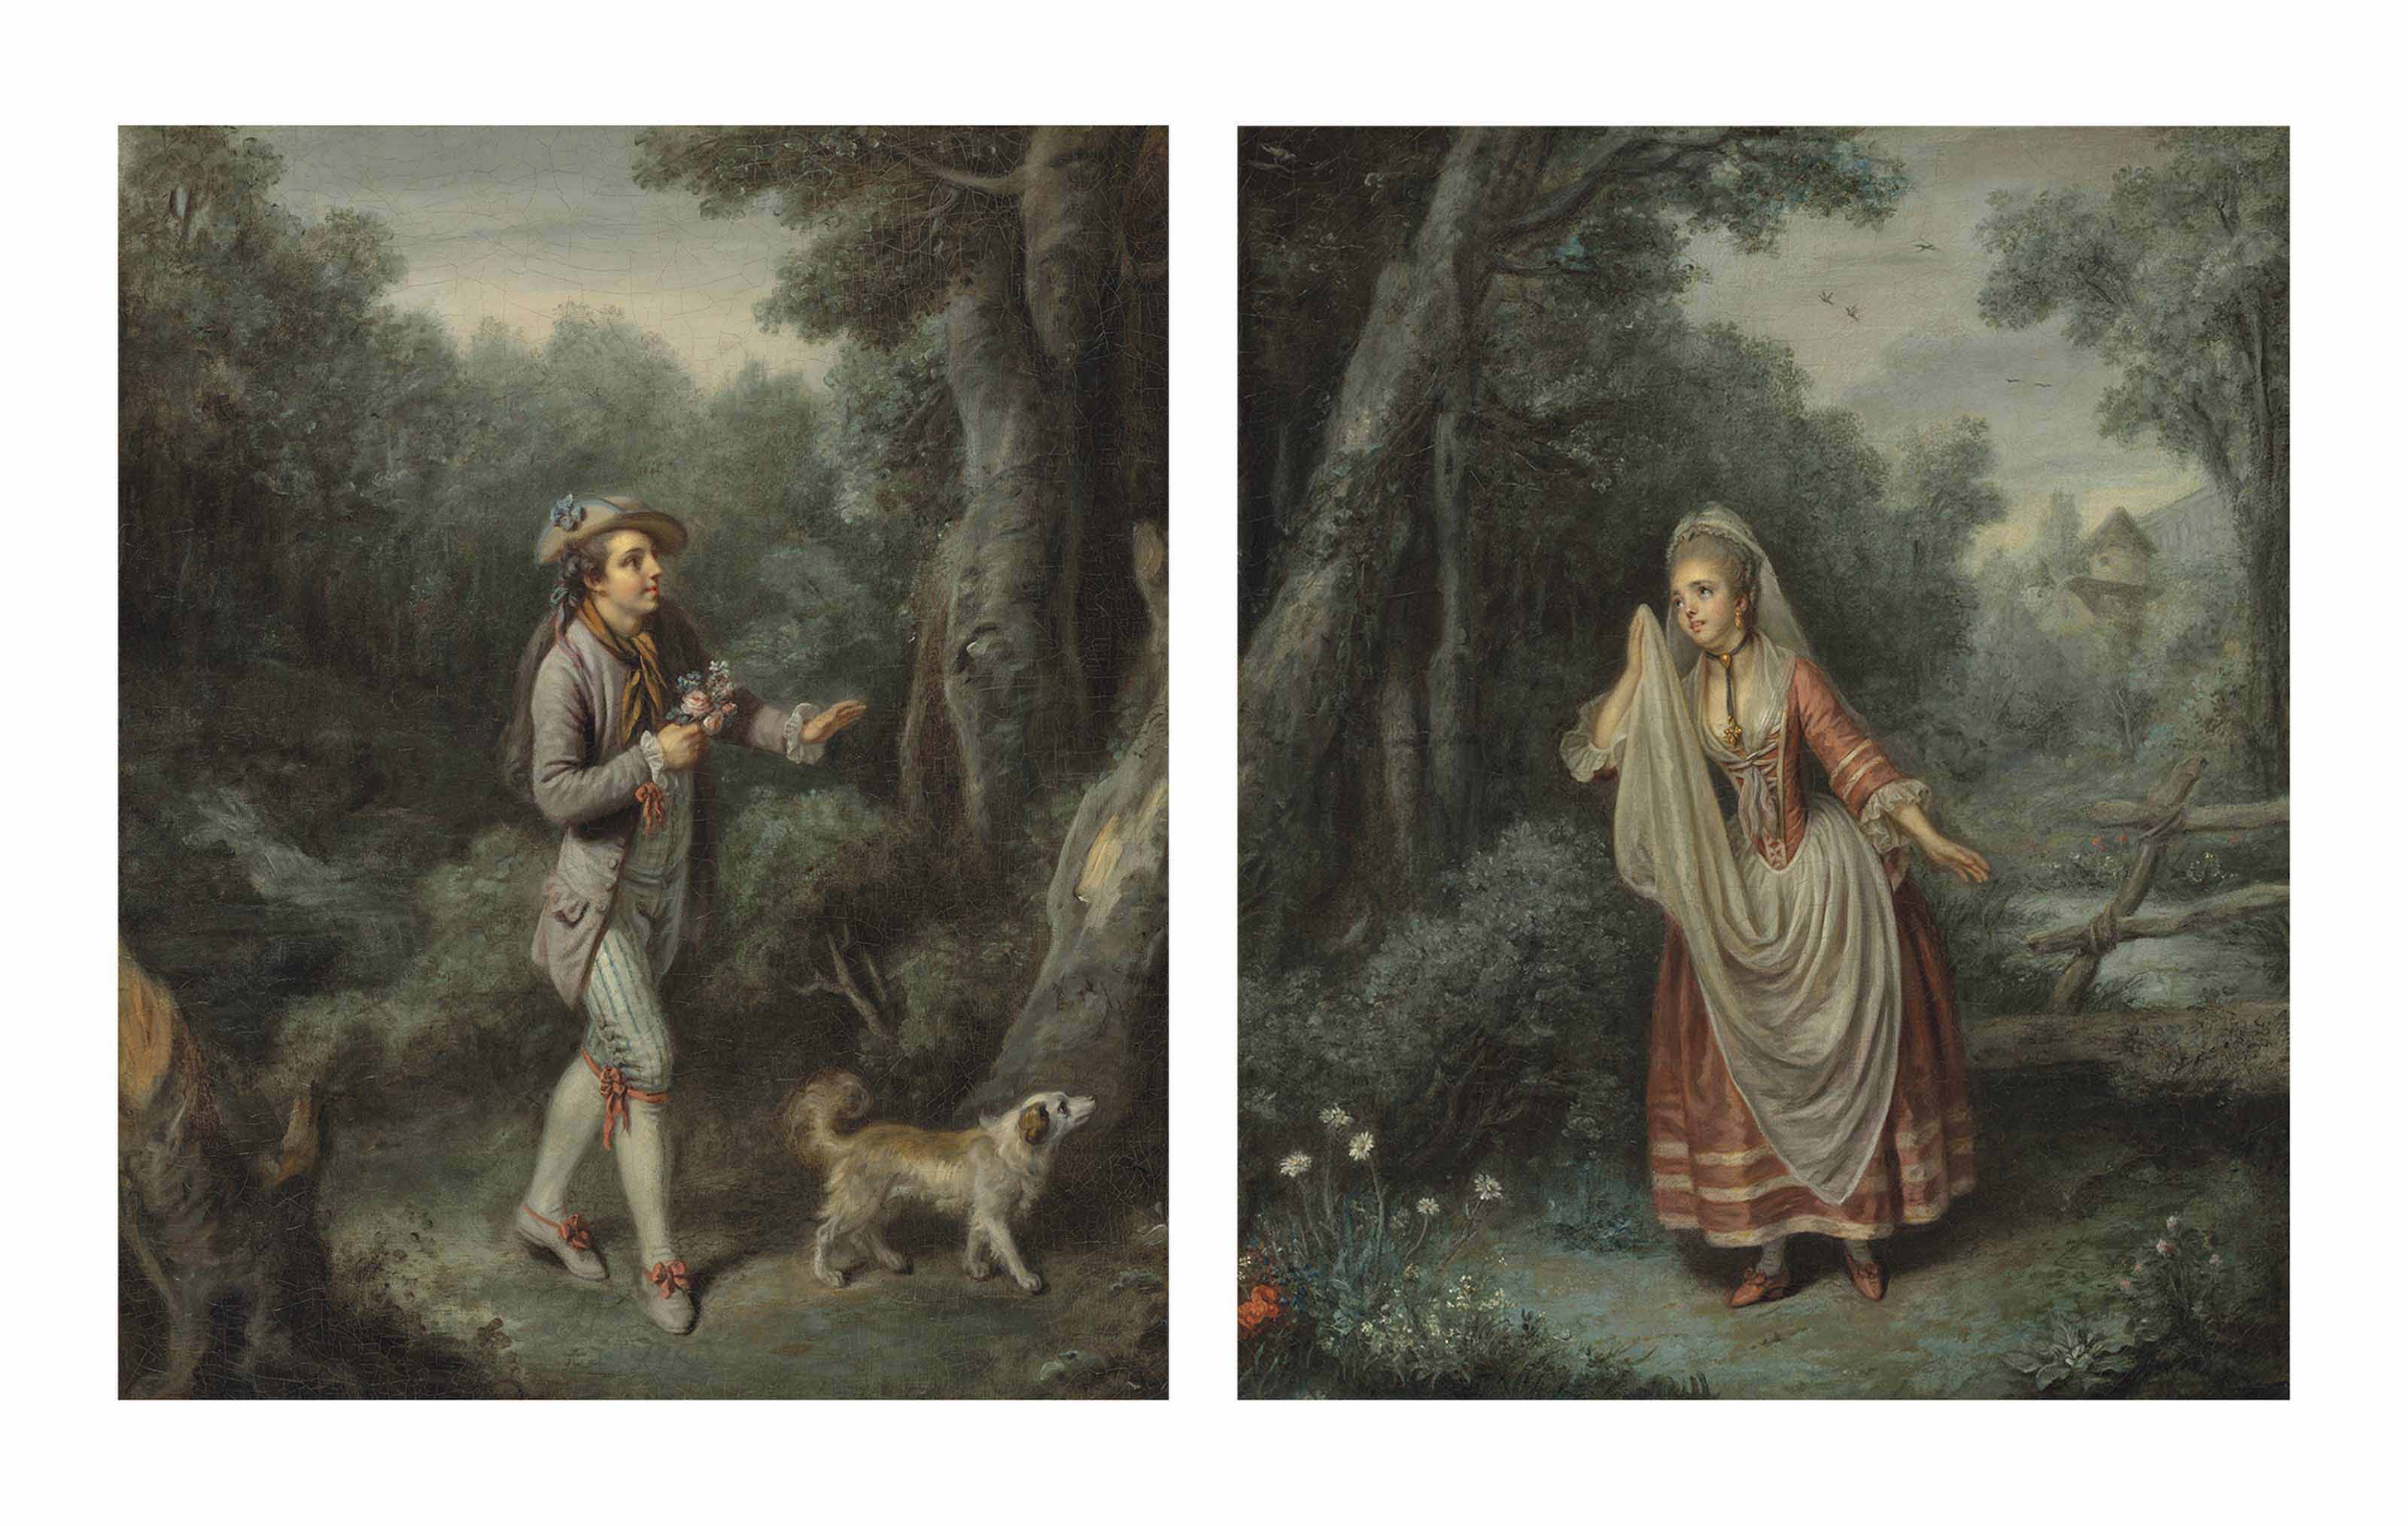 greuze 1785-90 lubin-and-annette_-a-pastoral-comedy-based-on-one-of-the-contes-moraux-of-jean-françois-marmontel